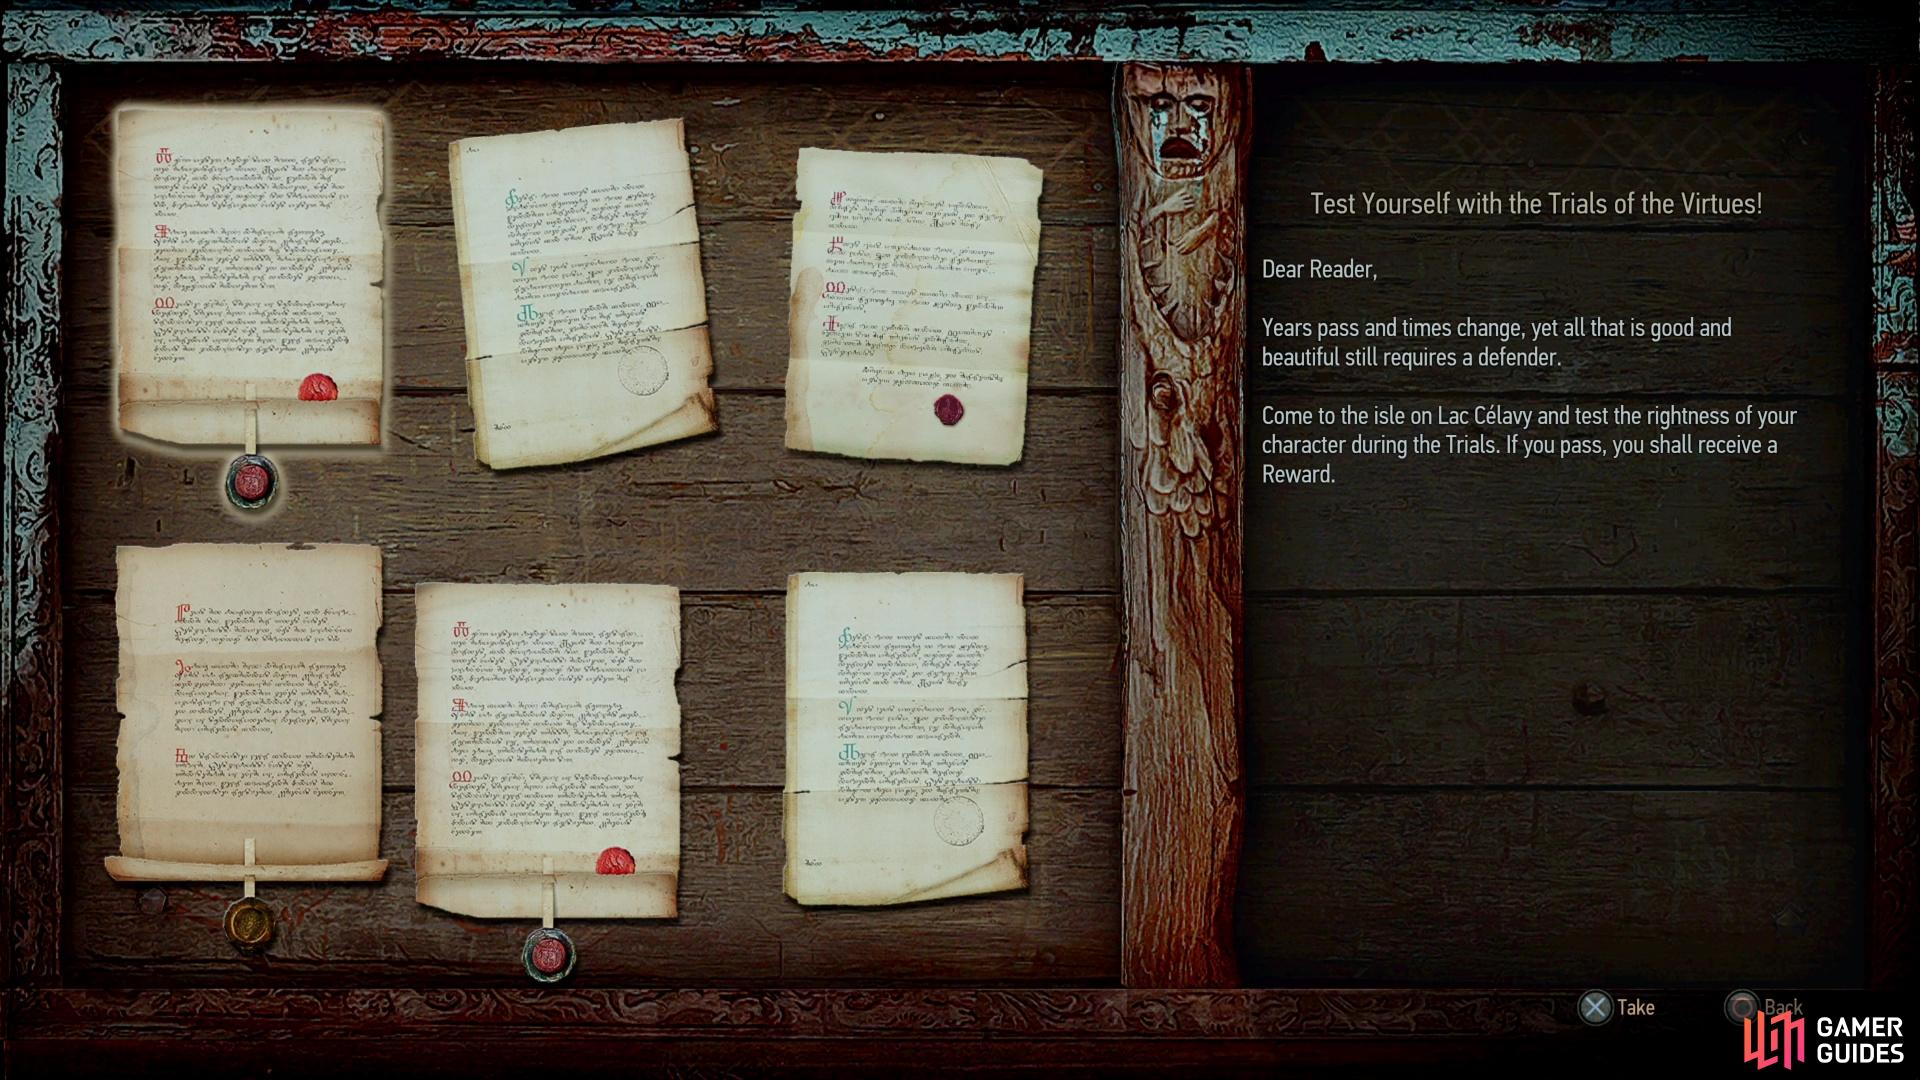 You can start "There Can Be Only One" by grabbing the "Test Yourself With Trials of the Virtues!" notice from the Notice Board near The Gran Palace Notice Board in Beauclair.